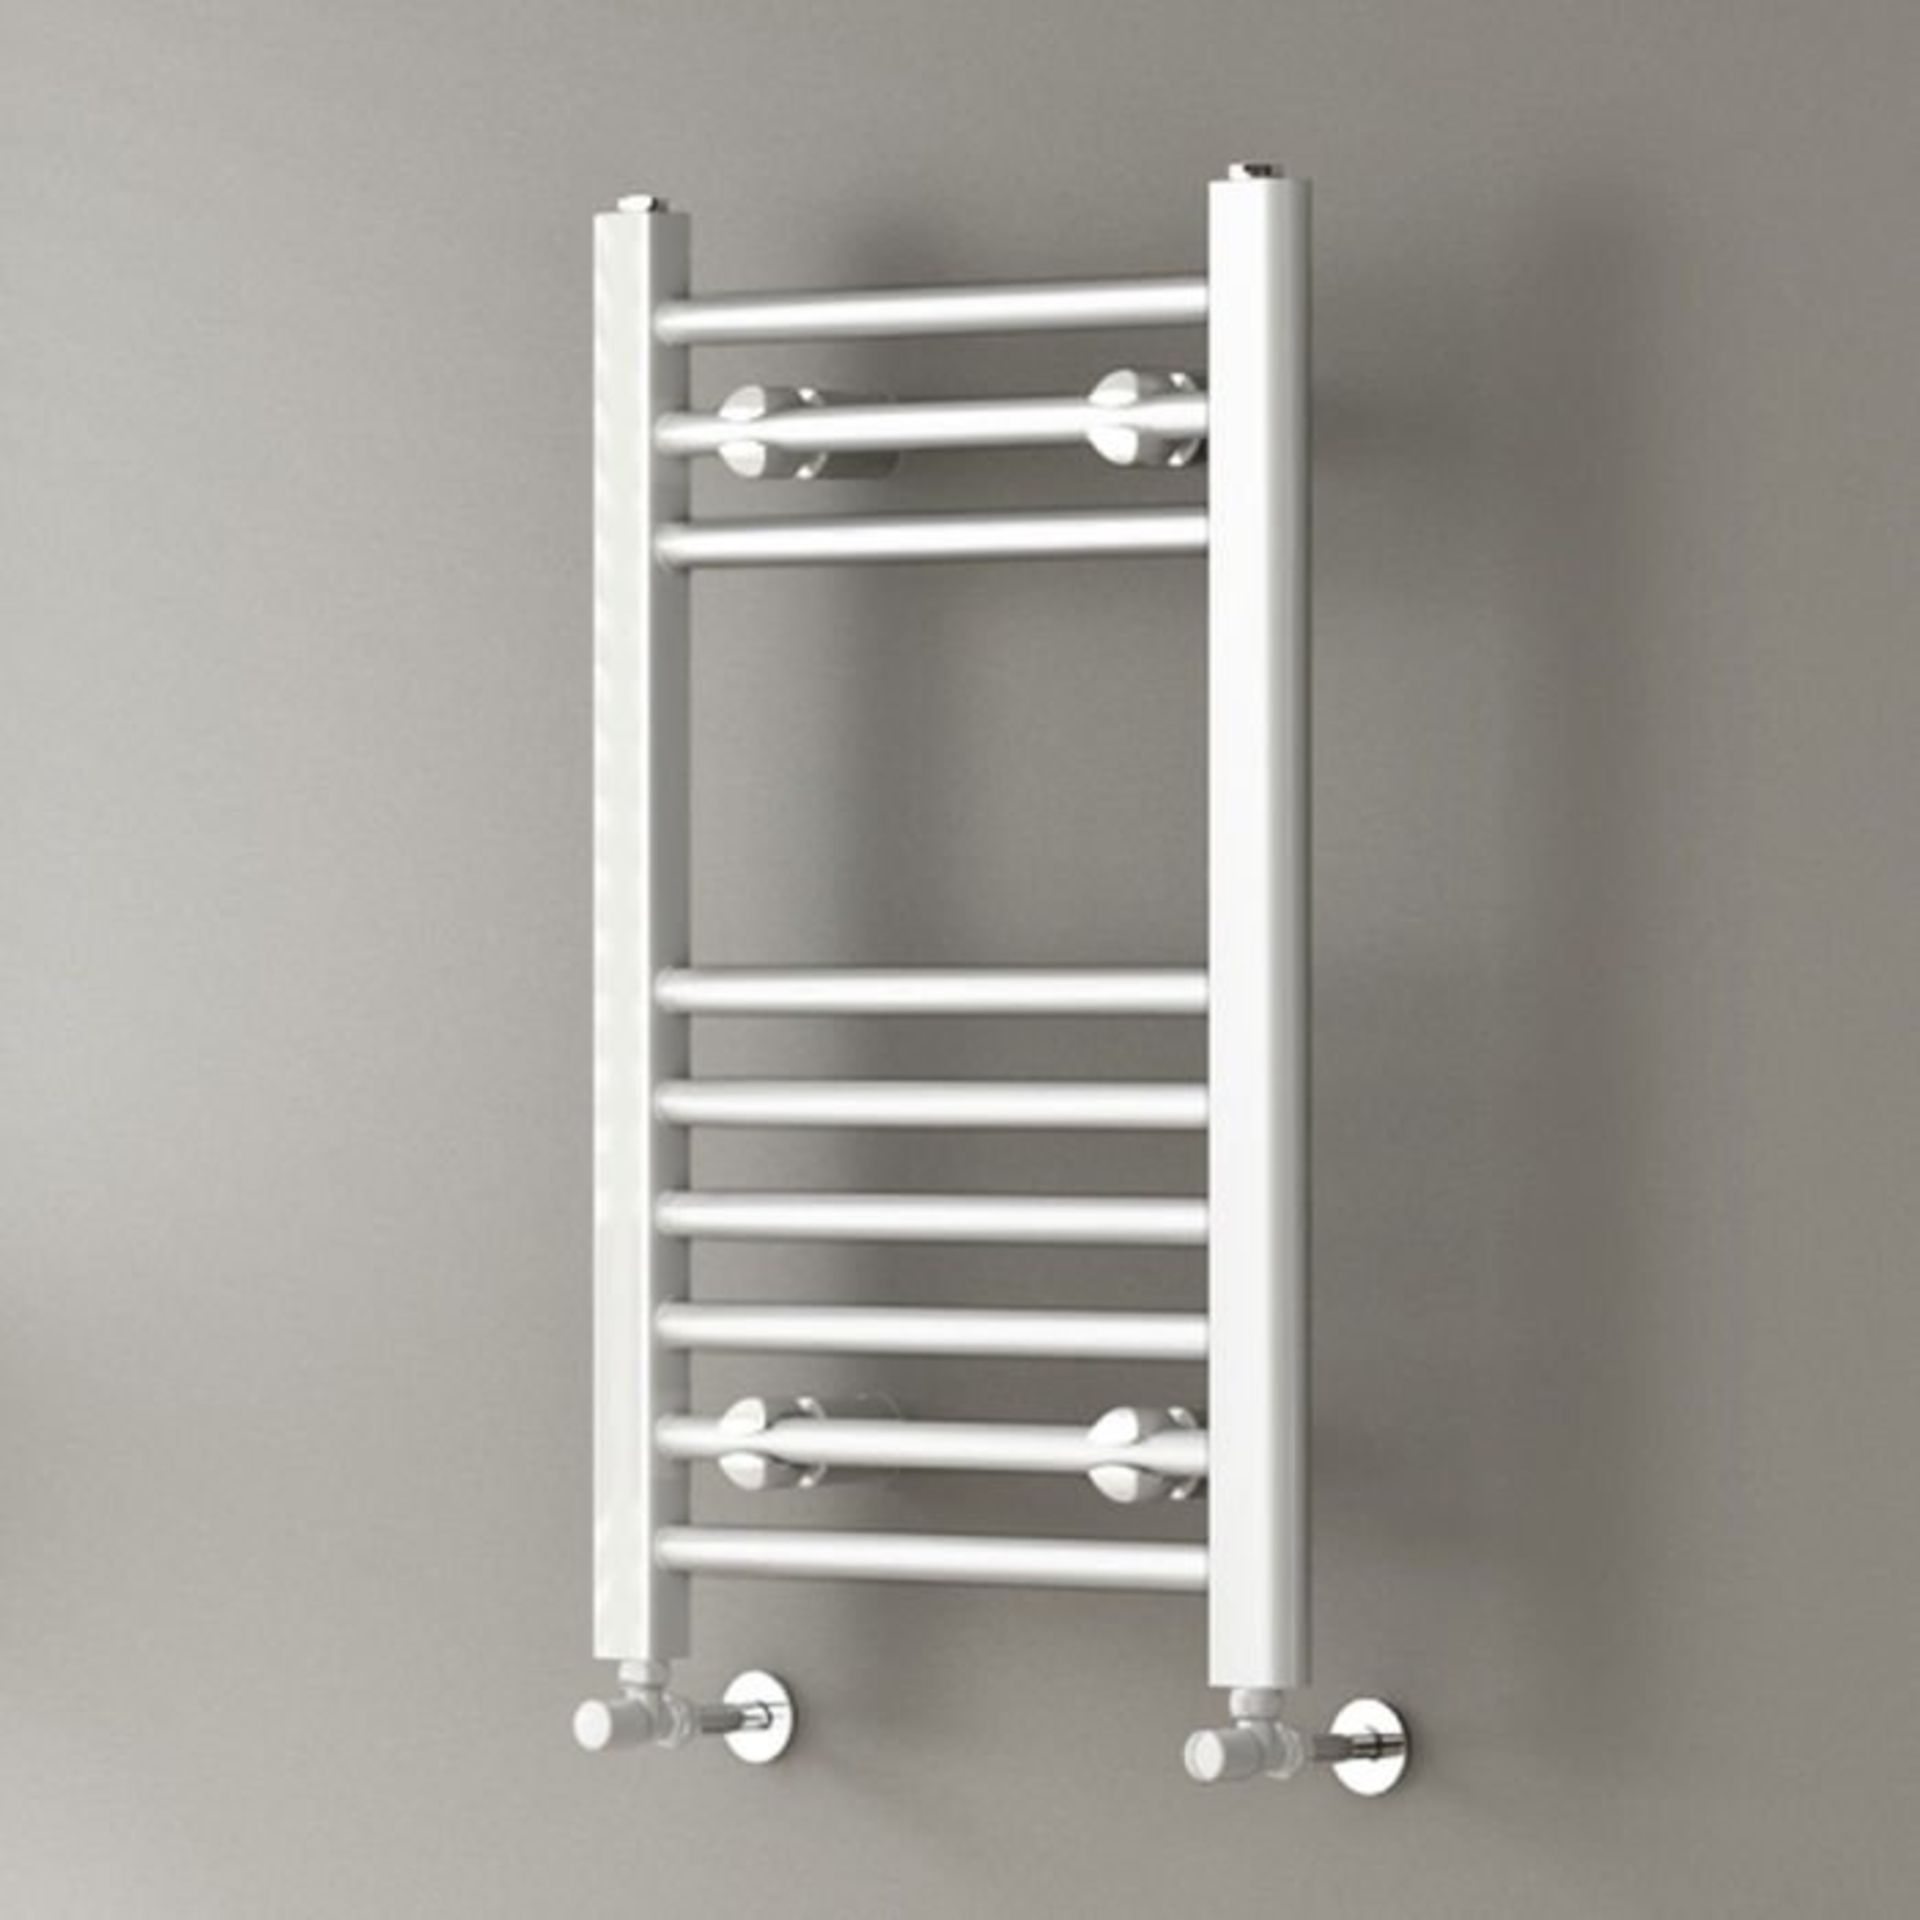 (Z174) 650x400mm White Straight Rail Ladder Towel Radiator. Low carbon steel, high quality white - Image 2 of 4